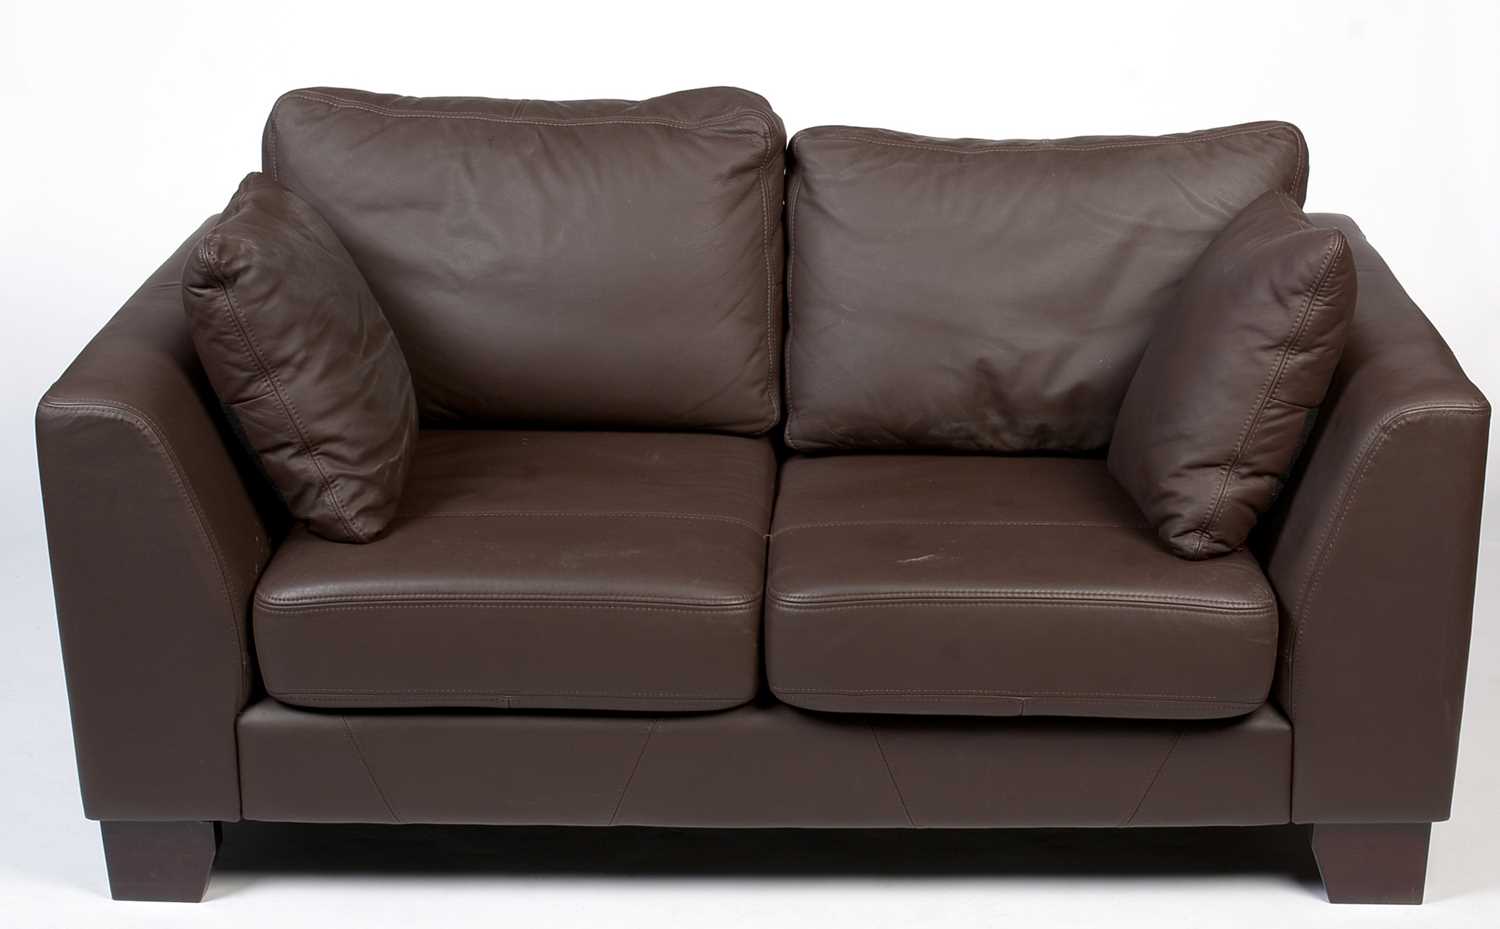 Siren Furniture Limited: A Toledo chocolate leather two seater sofa